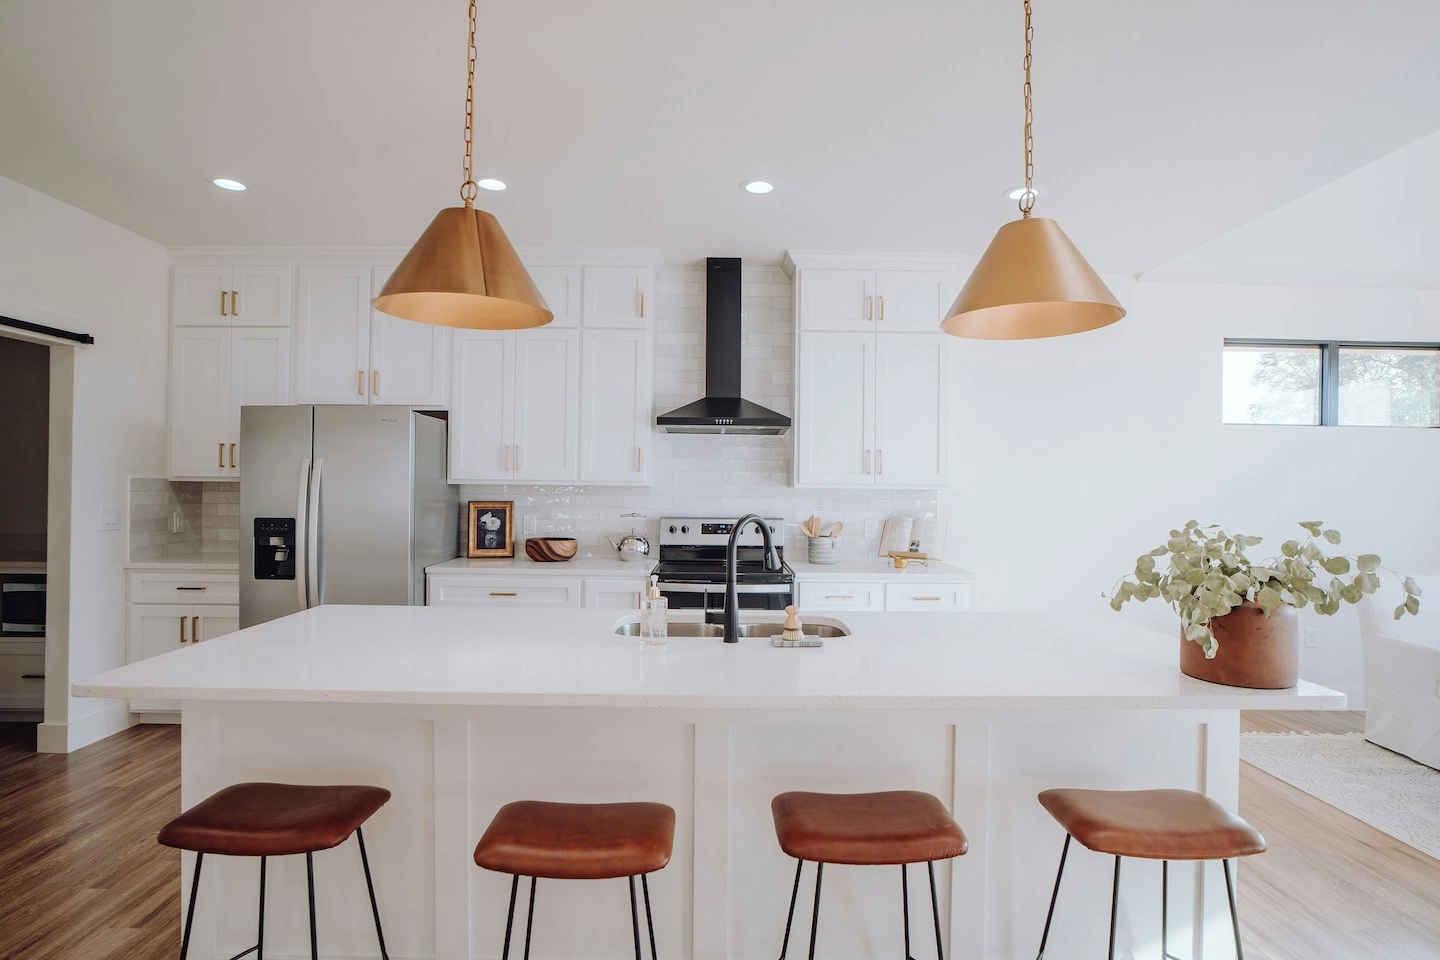 Home in North Austin with white countertops, brown barstools, and copper pendant lights.